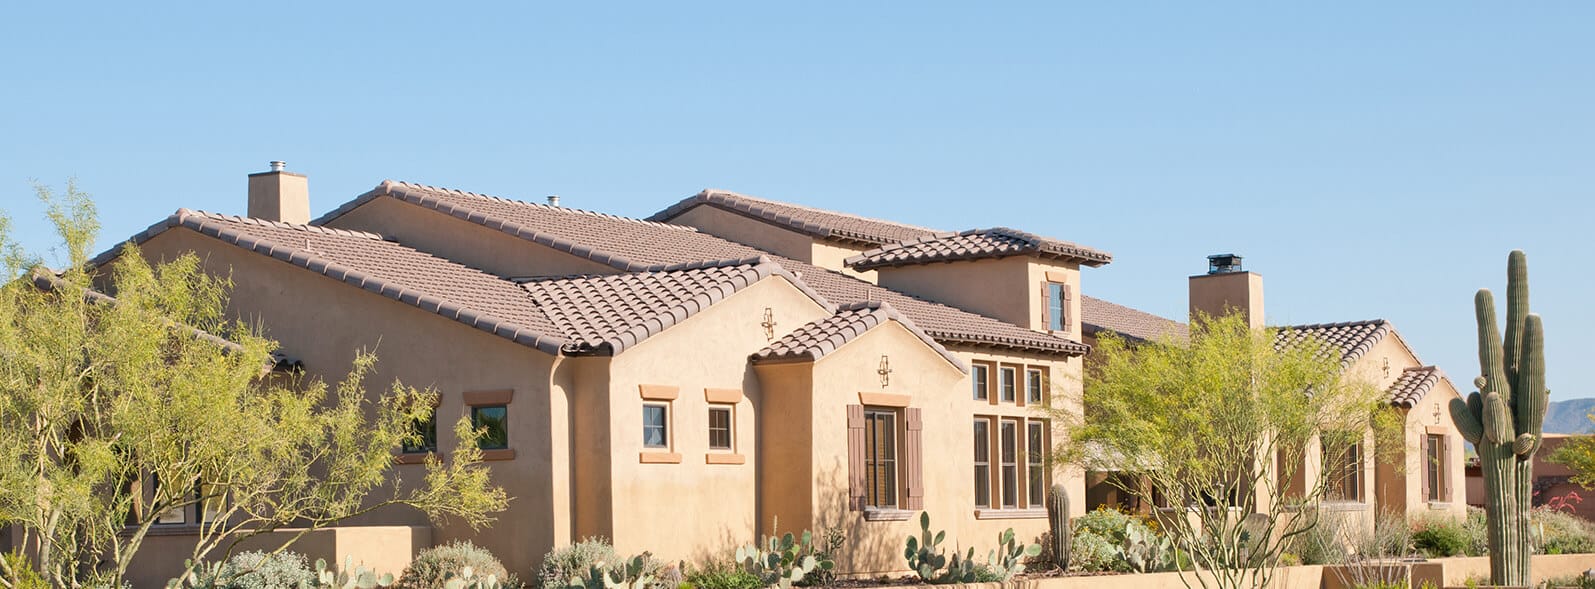 Diversified Roofing | House in desert